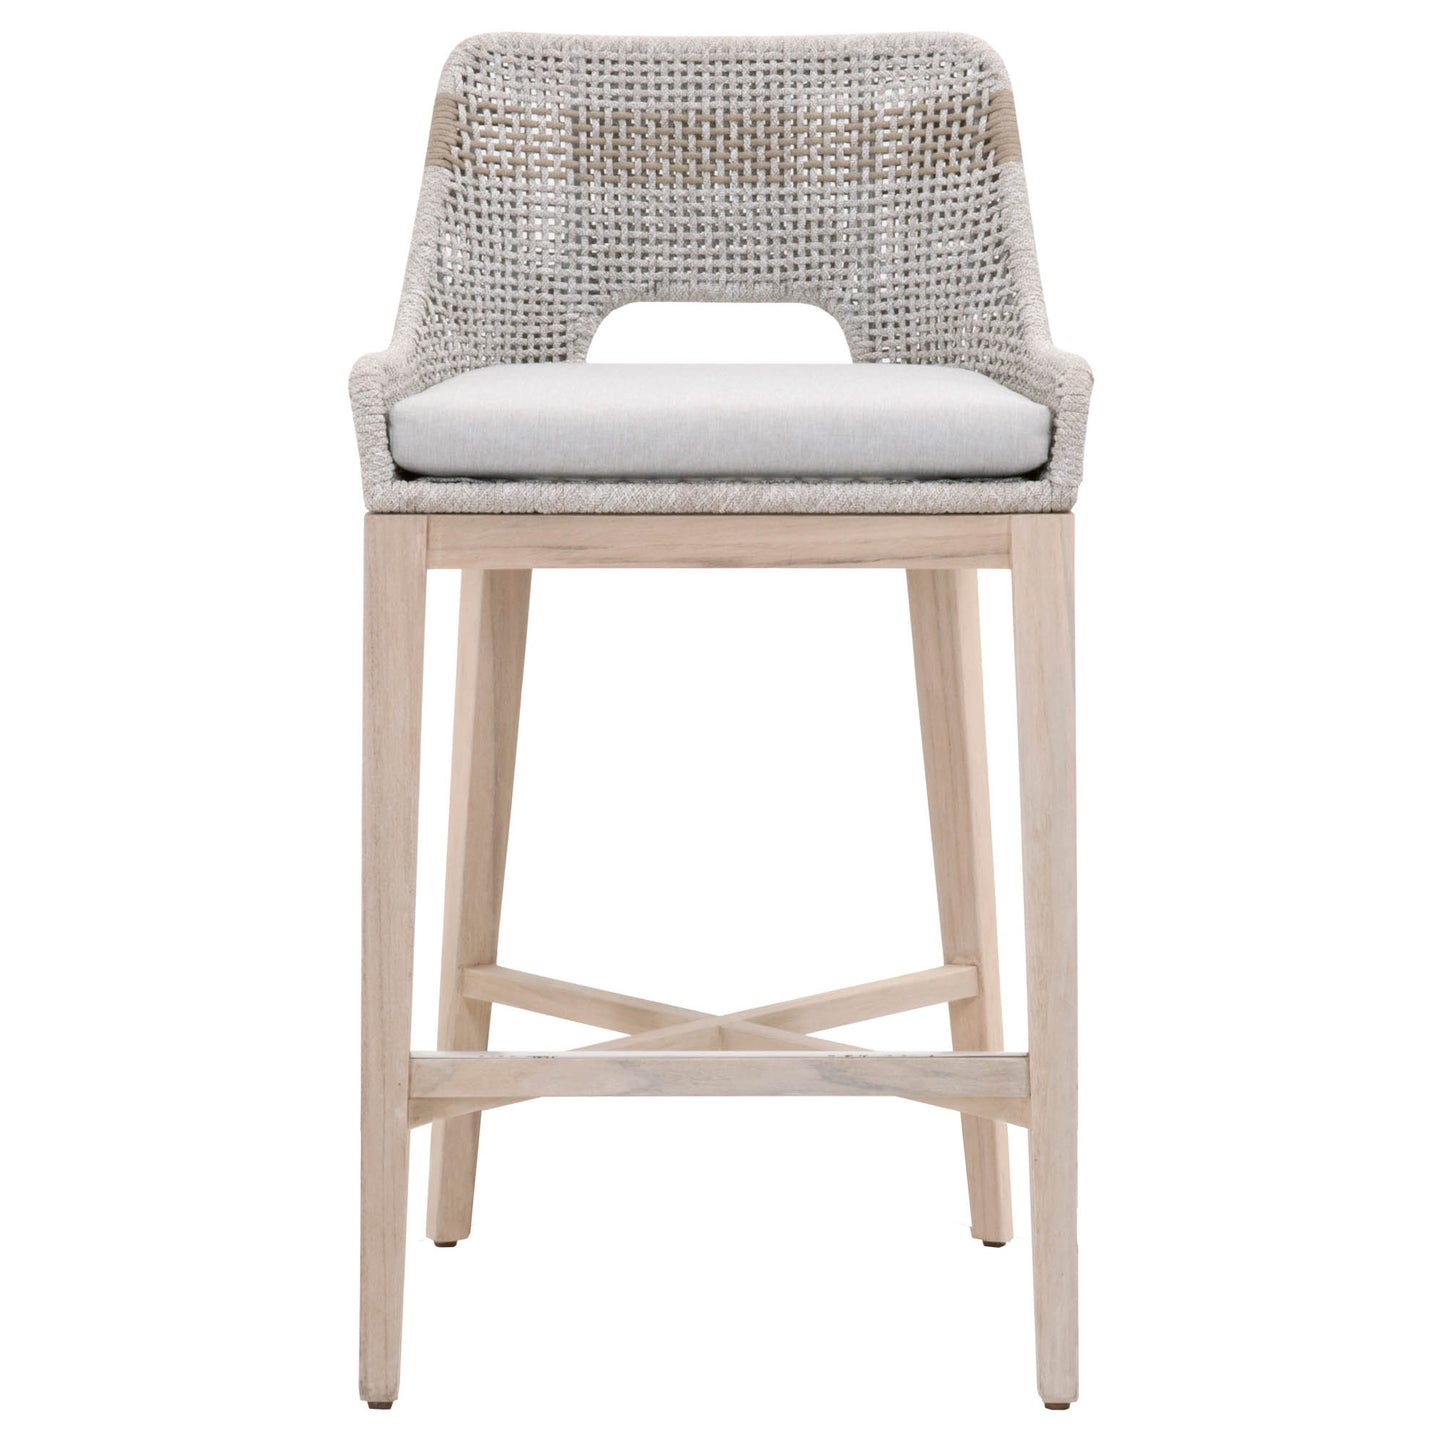 Interwoven Rope Bar Stool with Stretcher and Cross Support